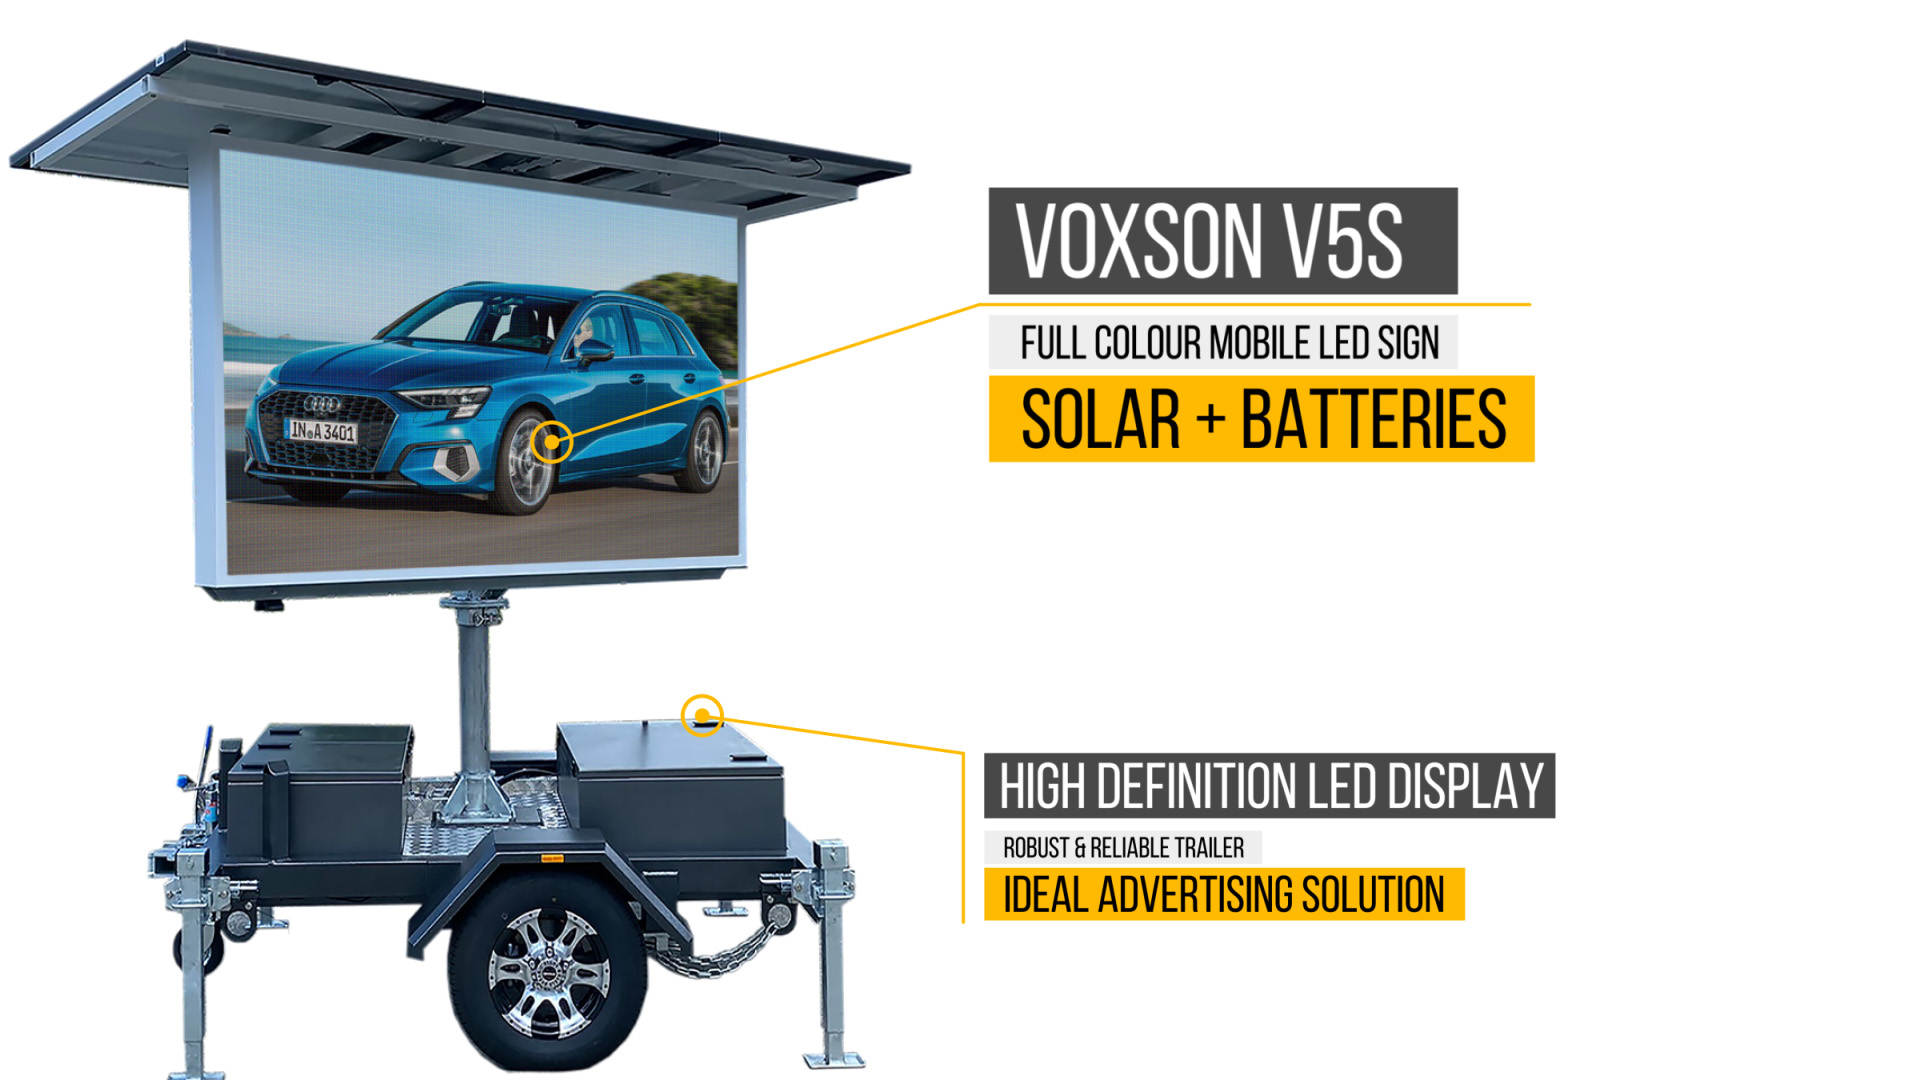 Introducing the Voxson V4s, a full colour Mobile LED Sign